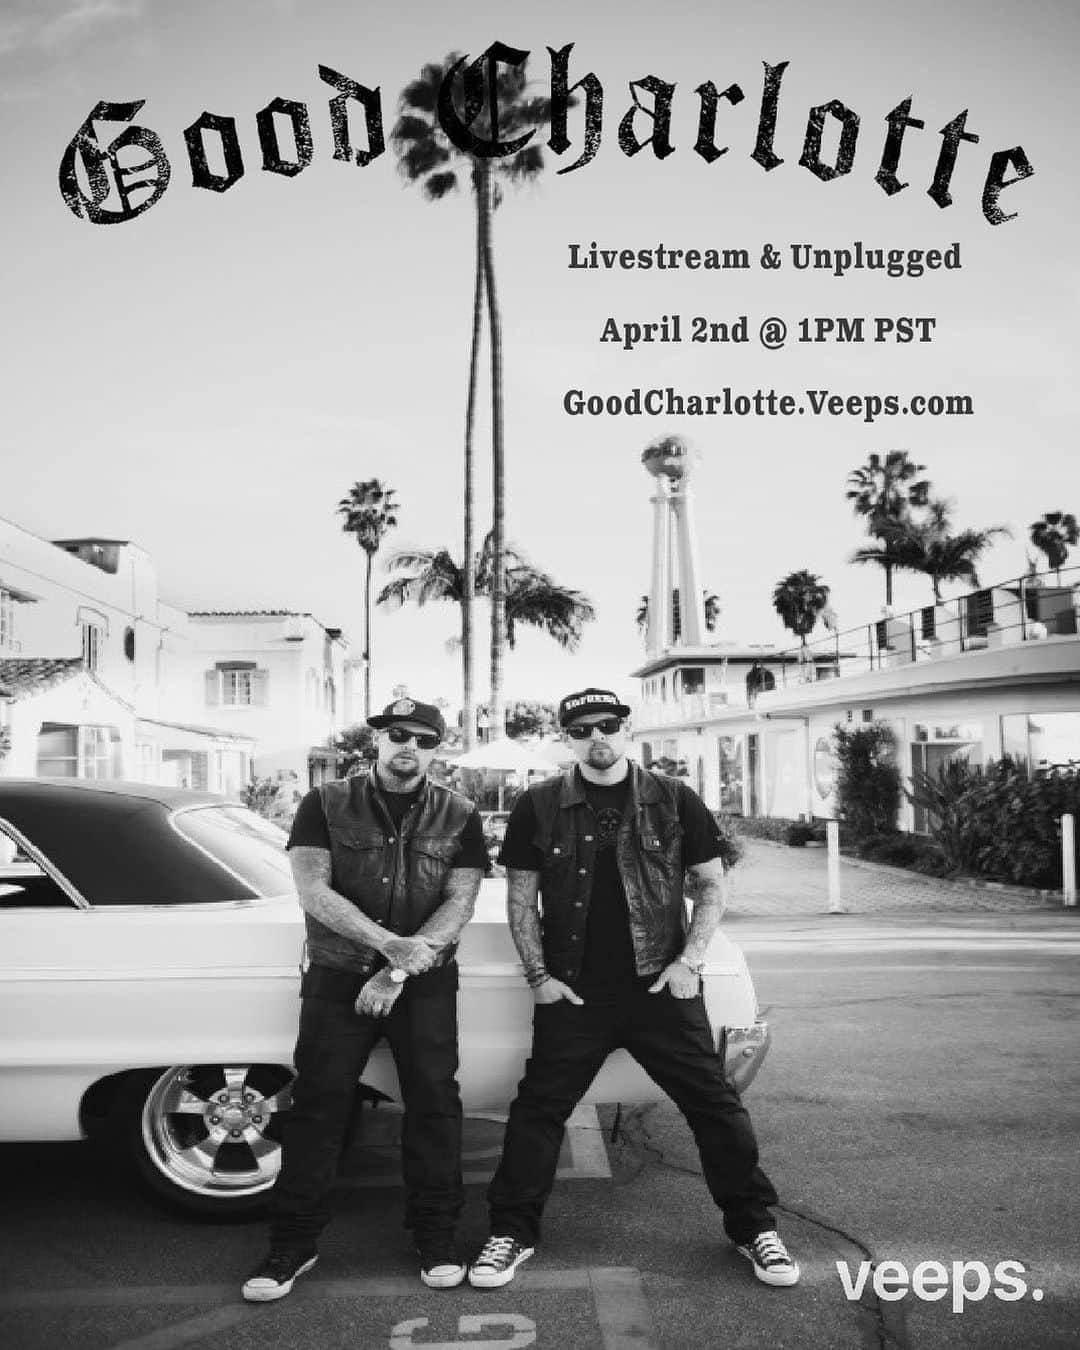 Good Charlotteのインスタグラム：「Tune in to a Special Live & Unplugged set with Benji & Joel Madden as they perform Good Charlotte tunes and share some stories. GoodCharlotte.Veeps.com  All proceeds going to charitable efforts in our community in the Covid19 crisis」